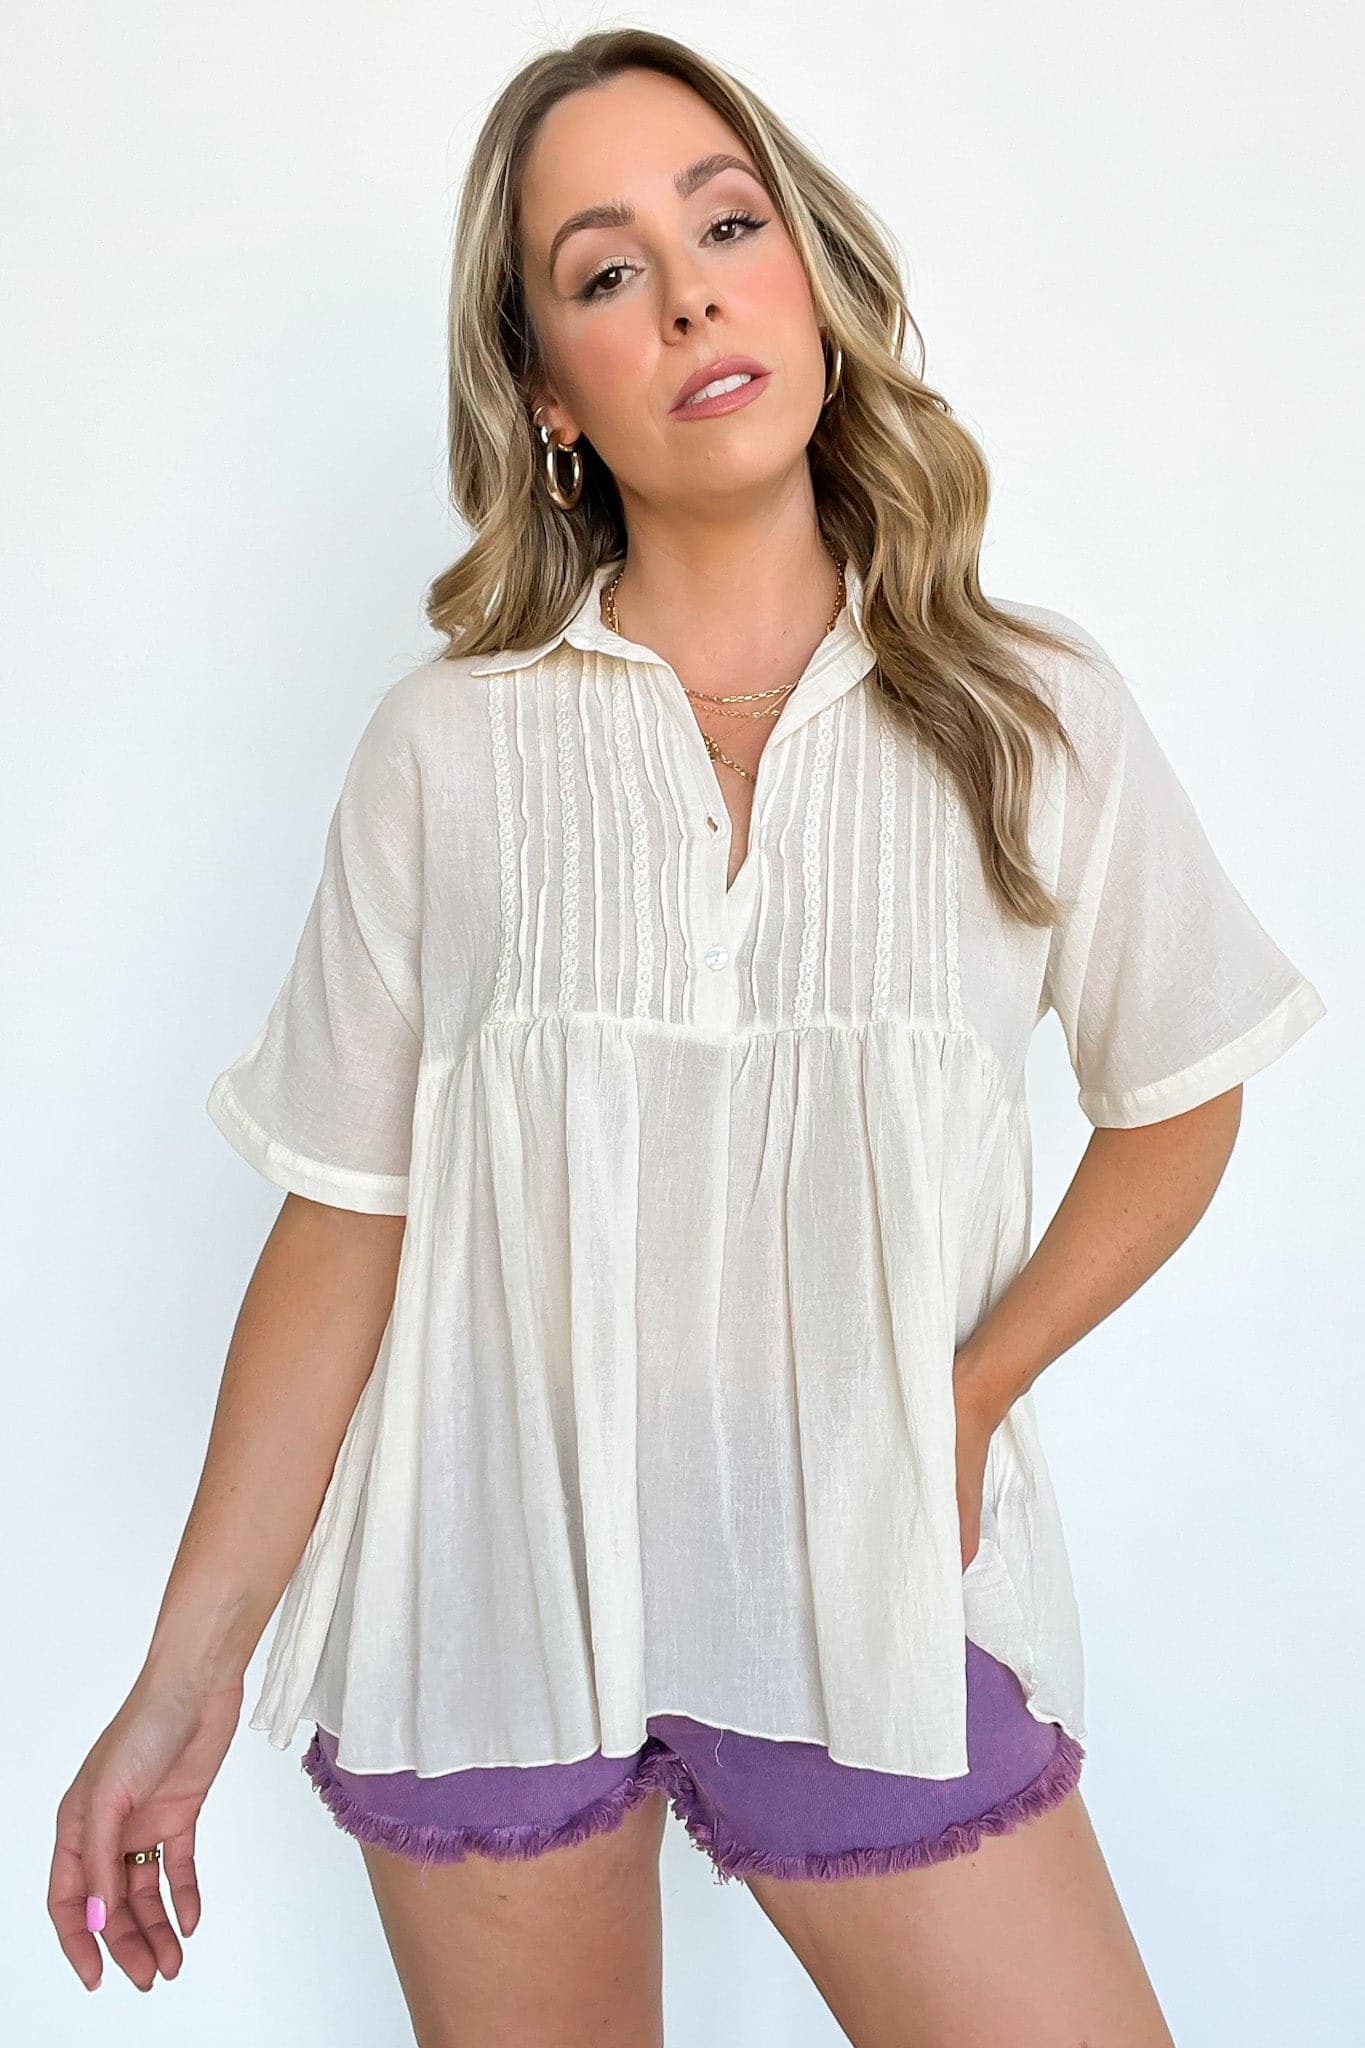  Summertime Inspiration Button Down Flowy Top - FINAL SALE - Madison and Mallory